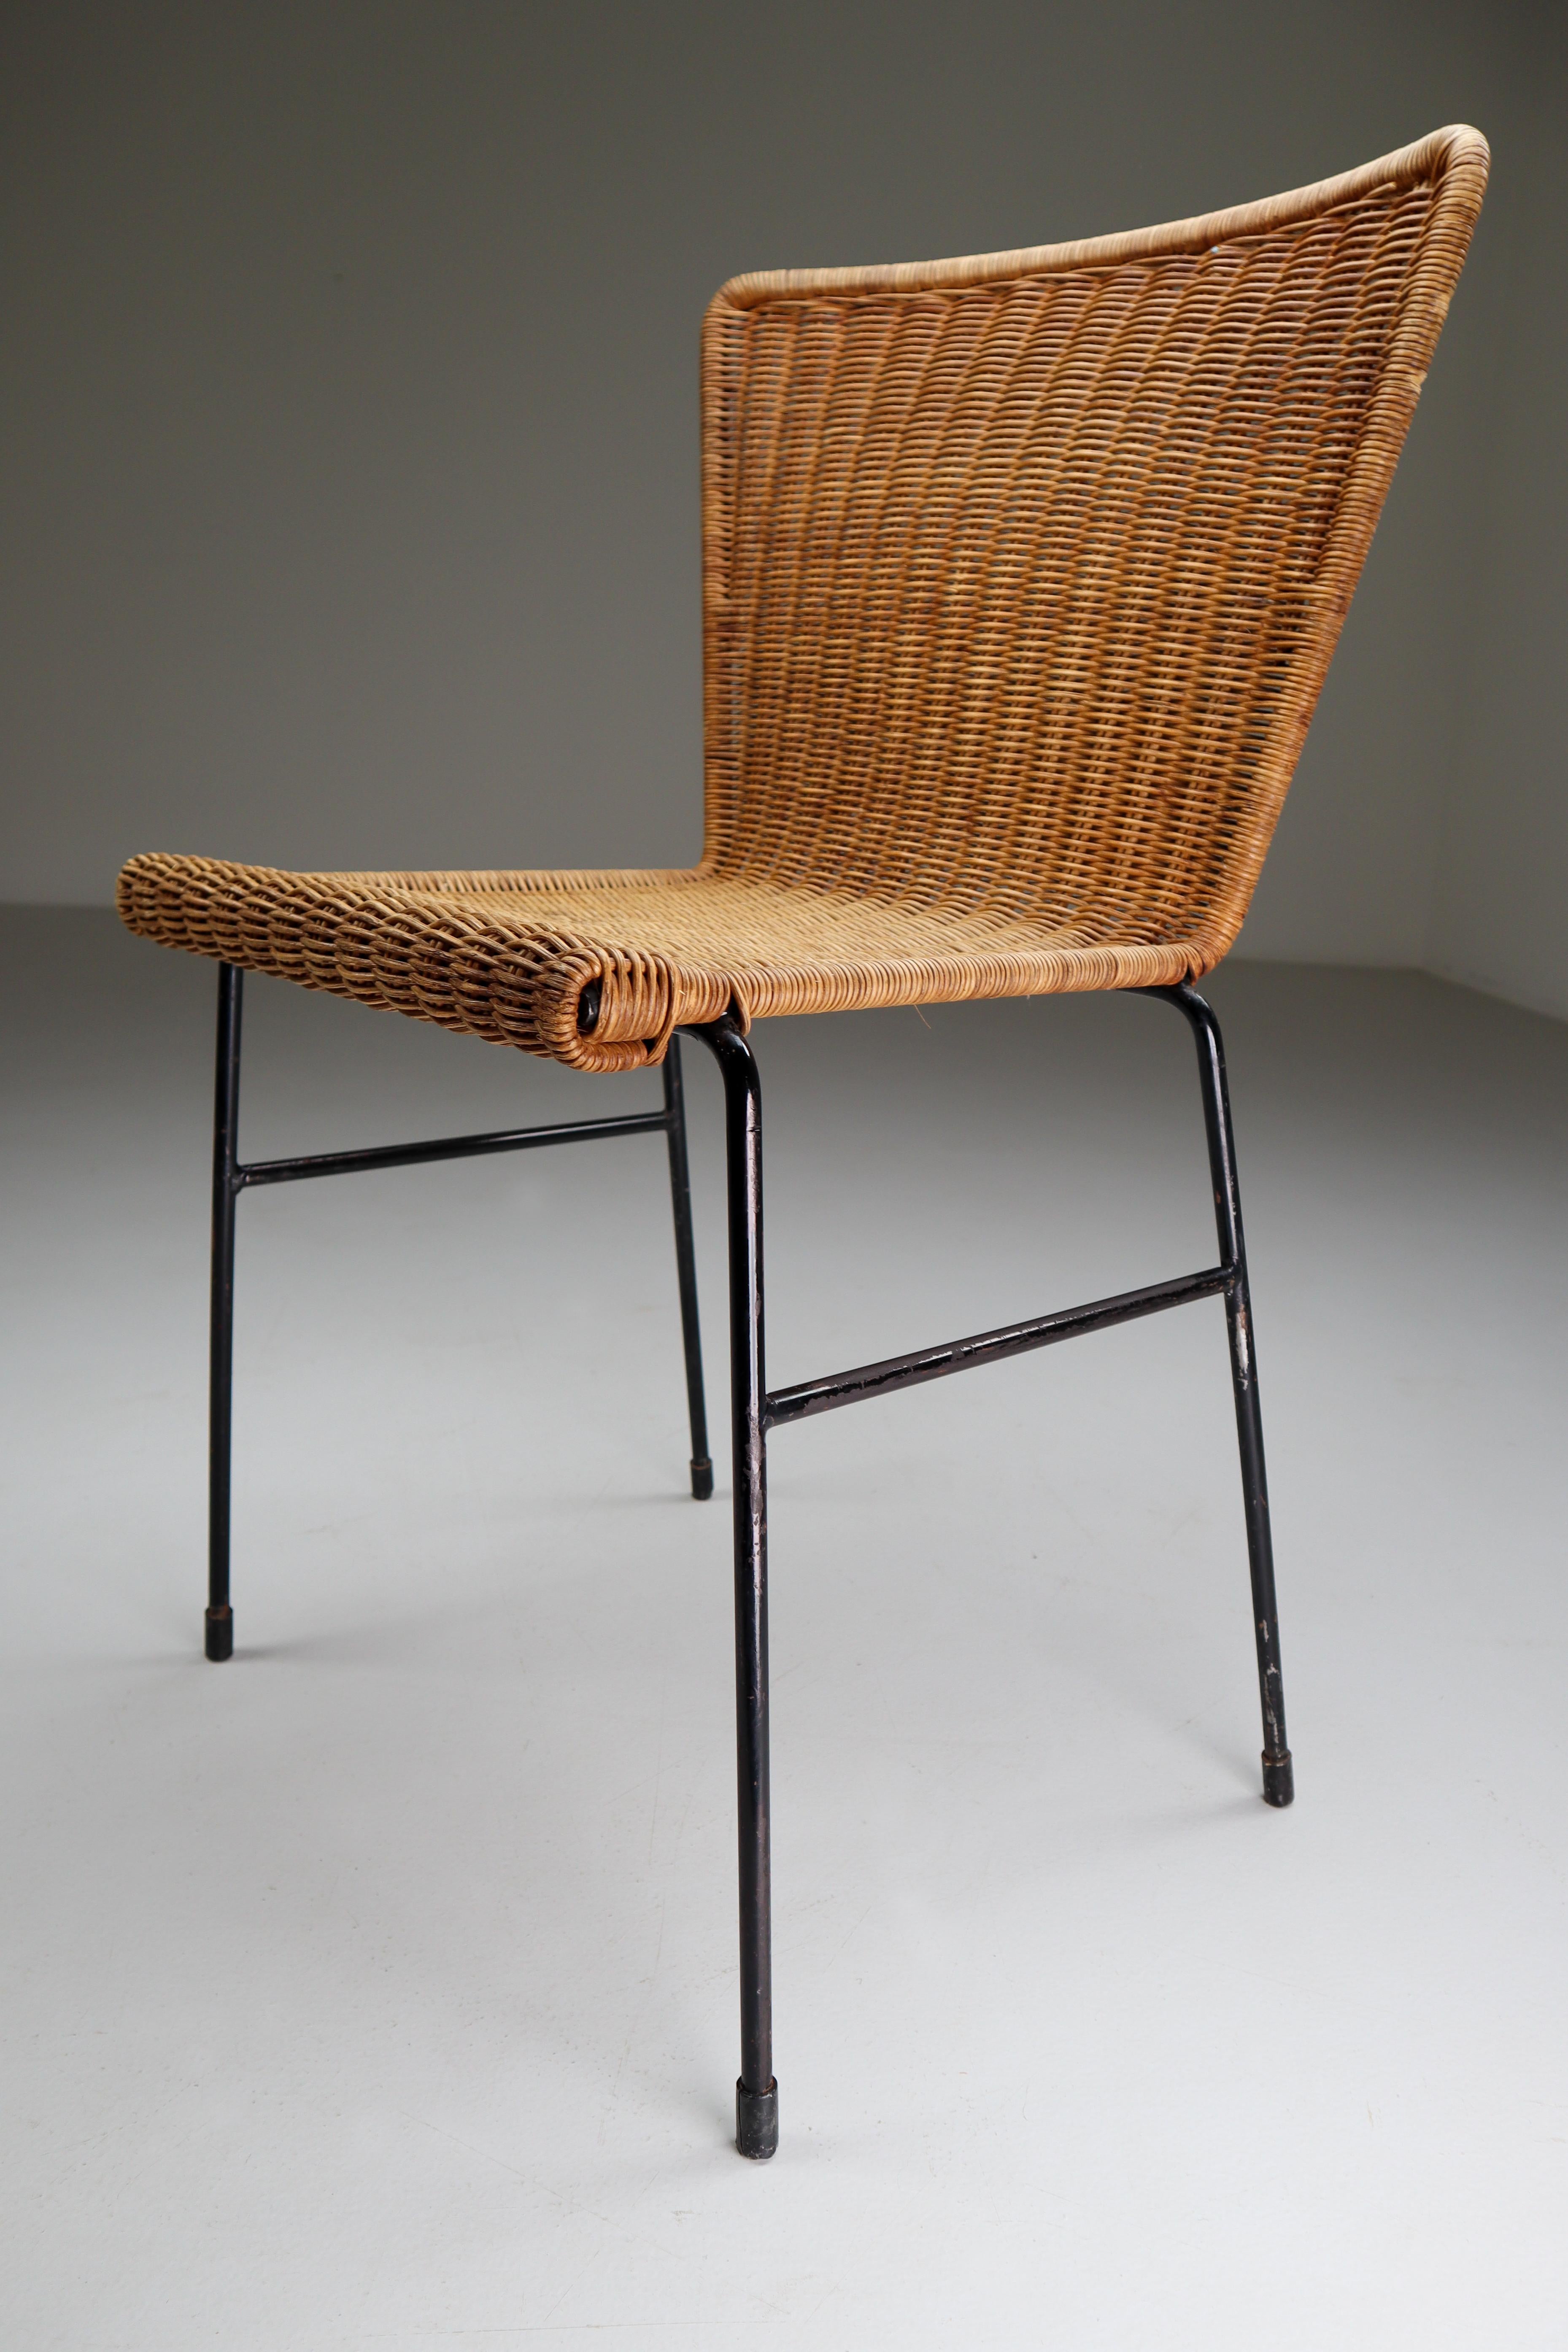 Patinated woven wicker midcentury chairs designed and produced in The Netherlands during the 1950s. The chair is made from handwoven wicker for the seat and he frame is made of black lacquered steel. They are comfortable to sit in and create an